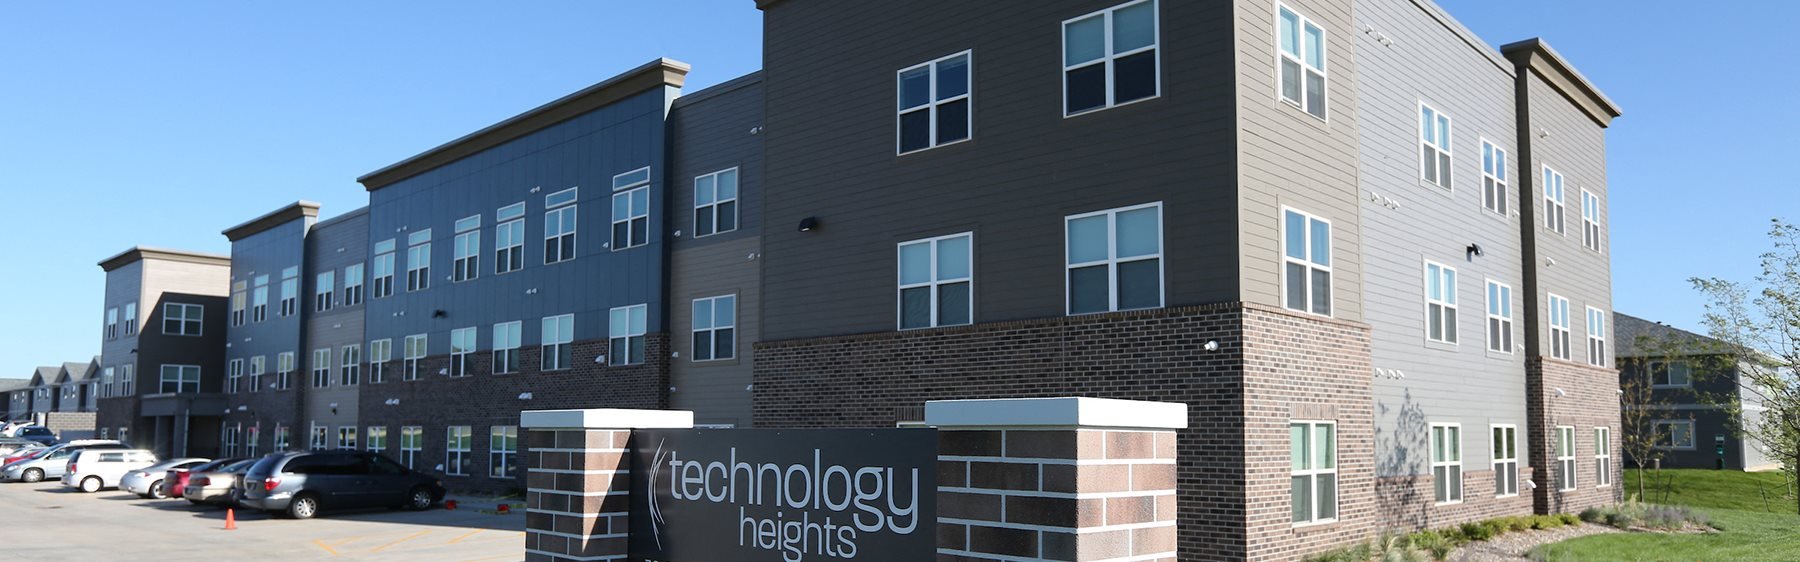 Technology Heights Exterior with Sign and Grass